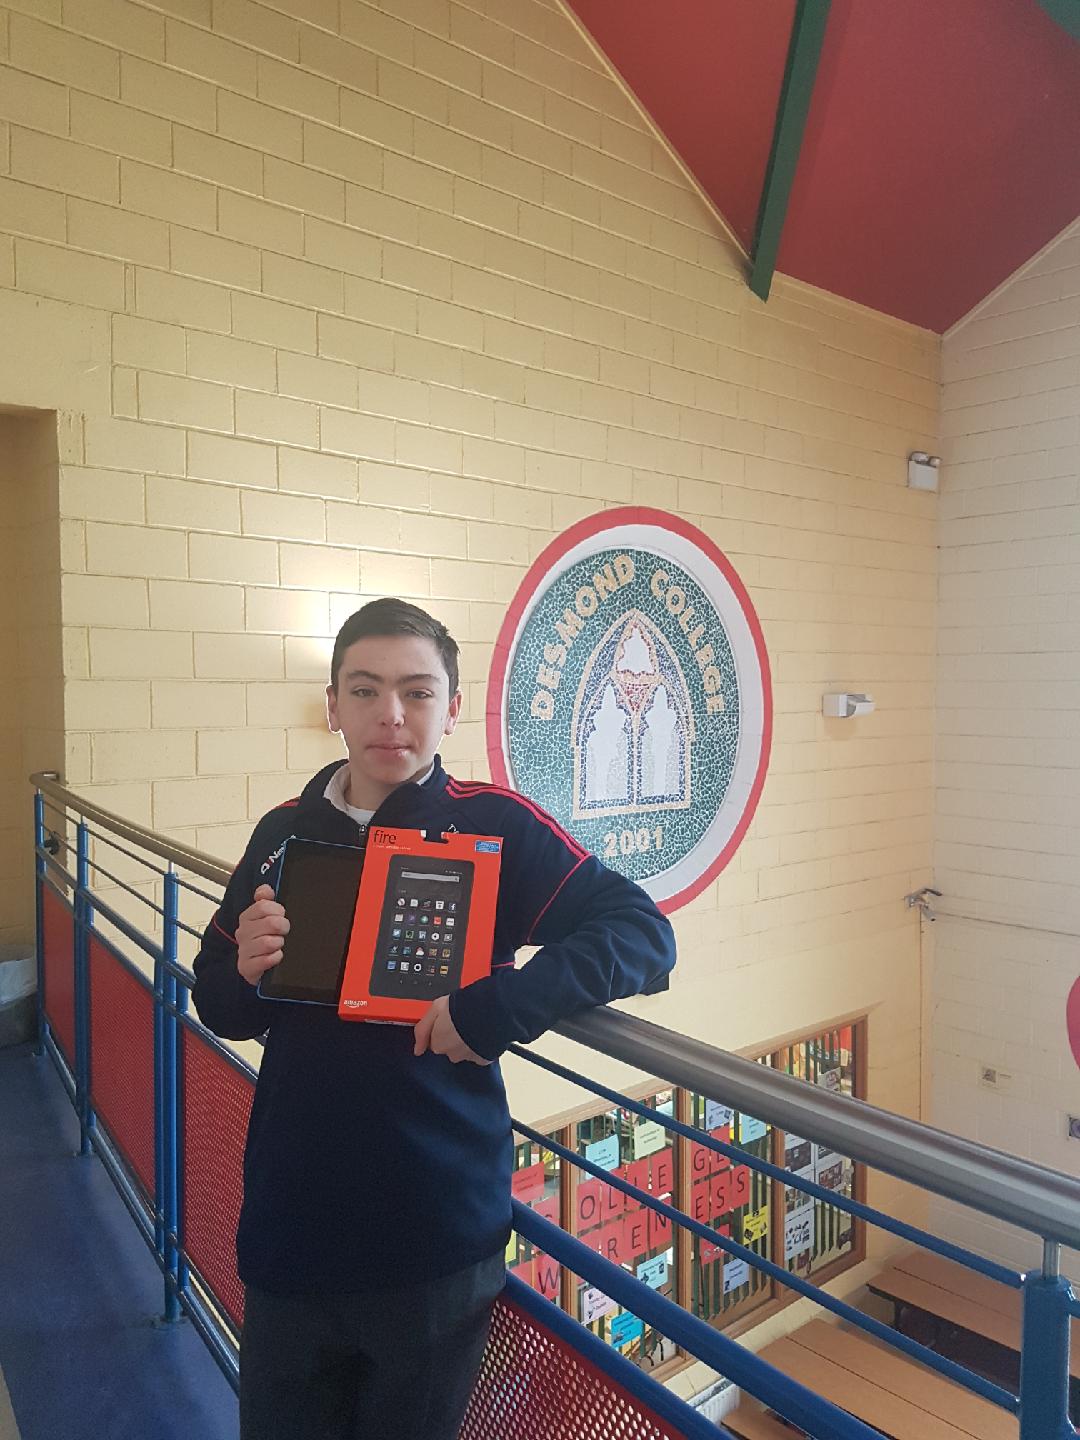 Congratulations to our Desmond College winner of a Tablet in the TY Christmas draw